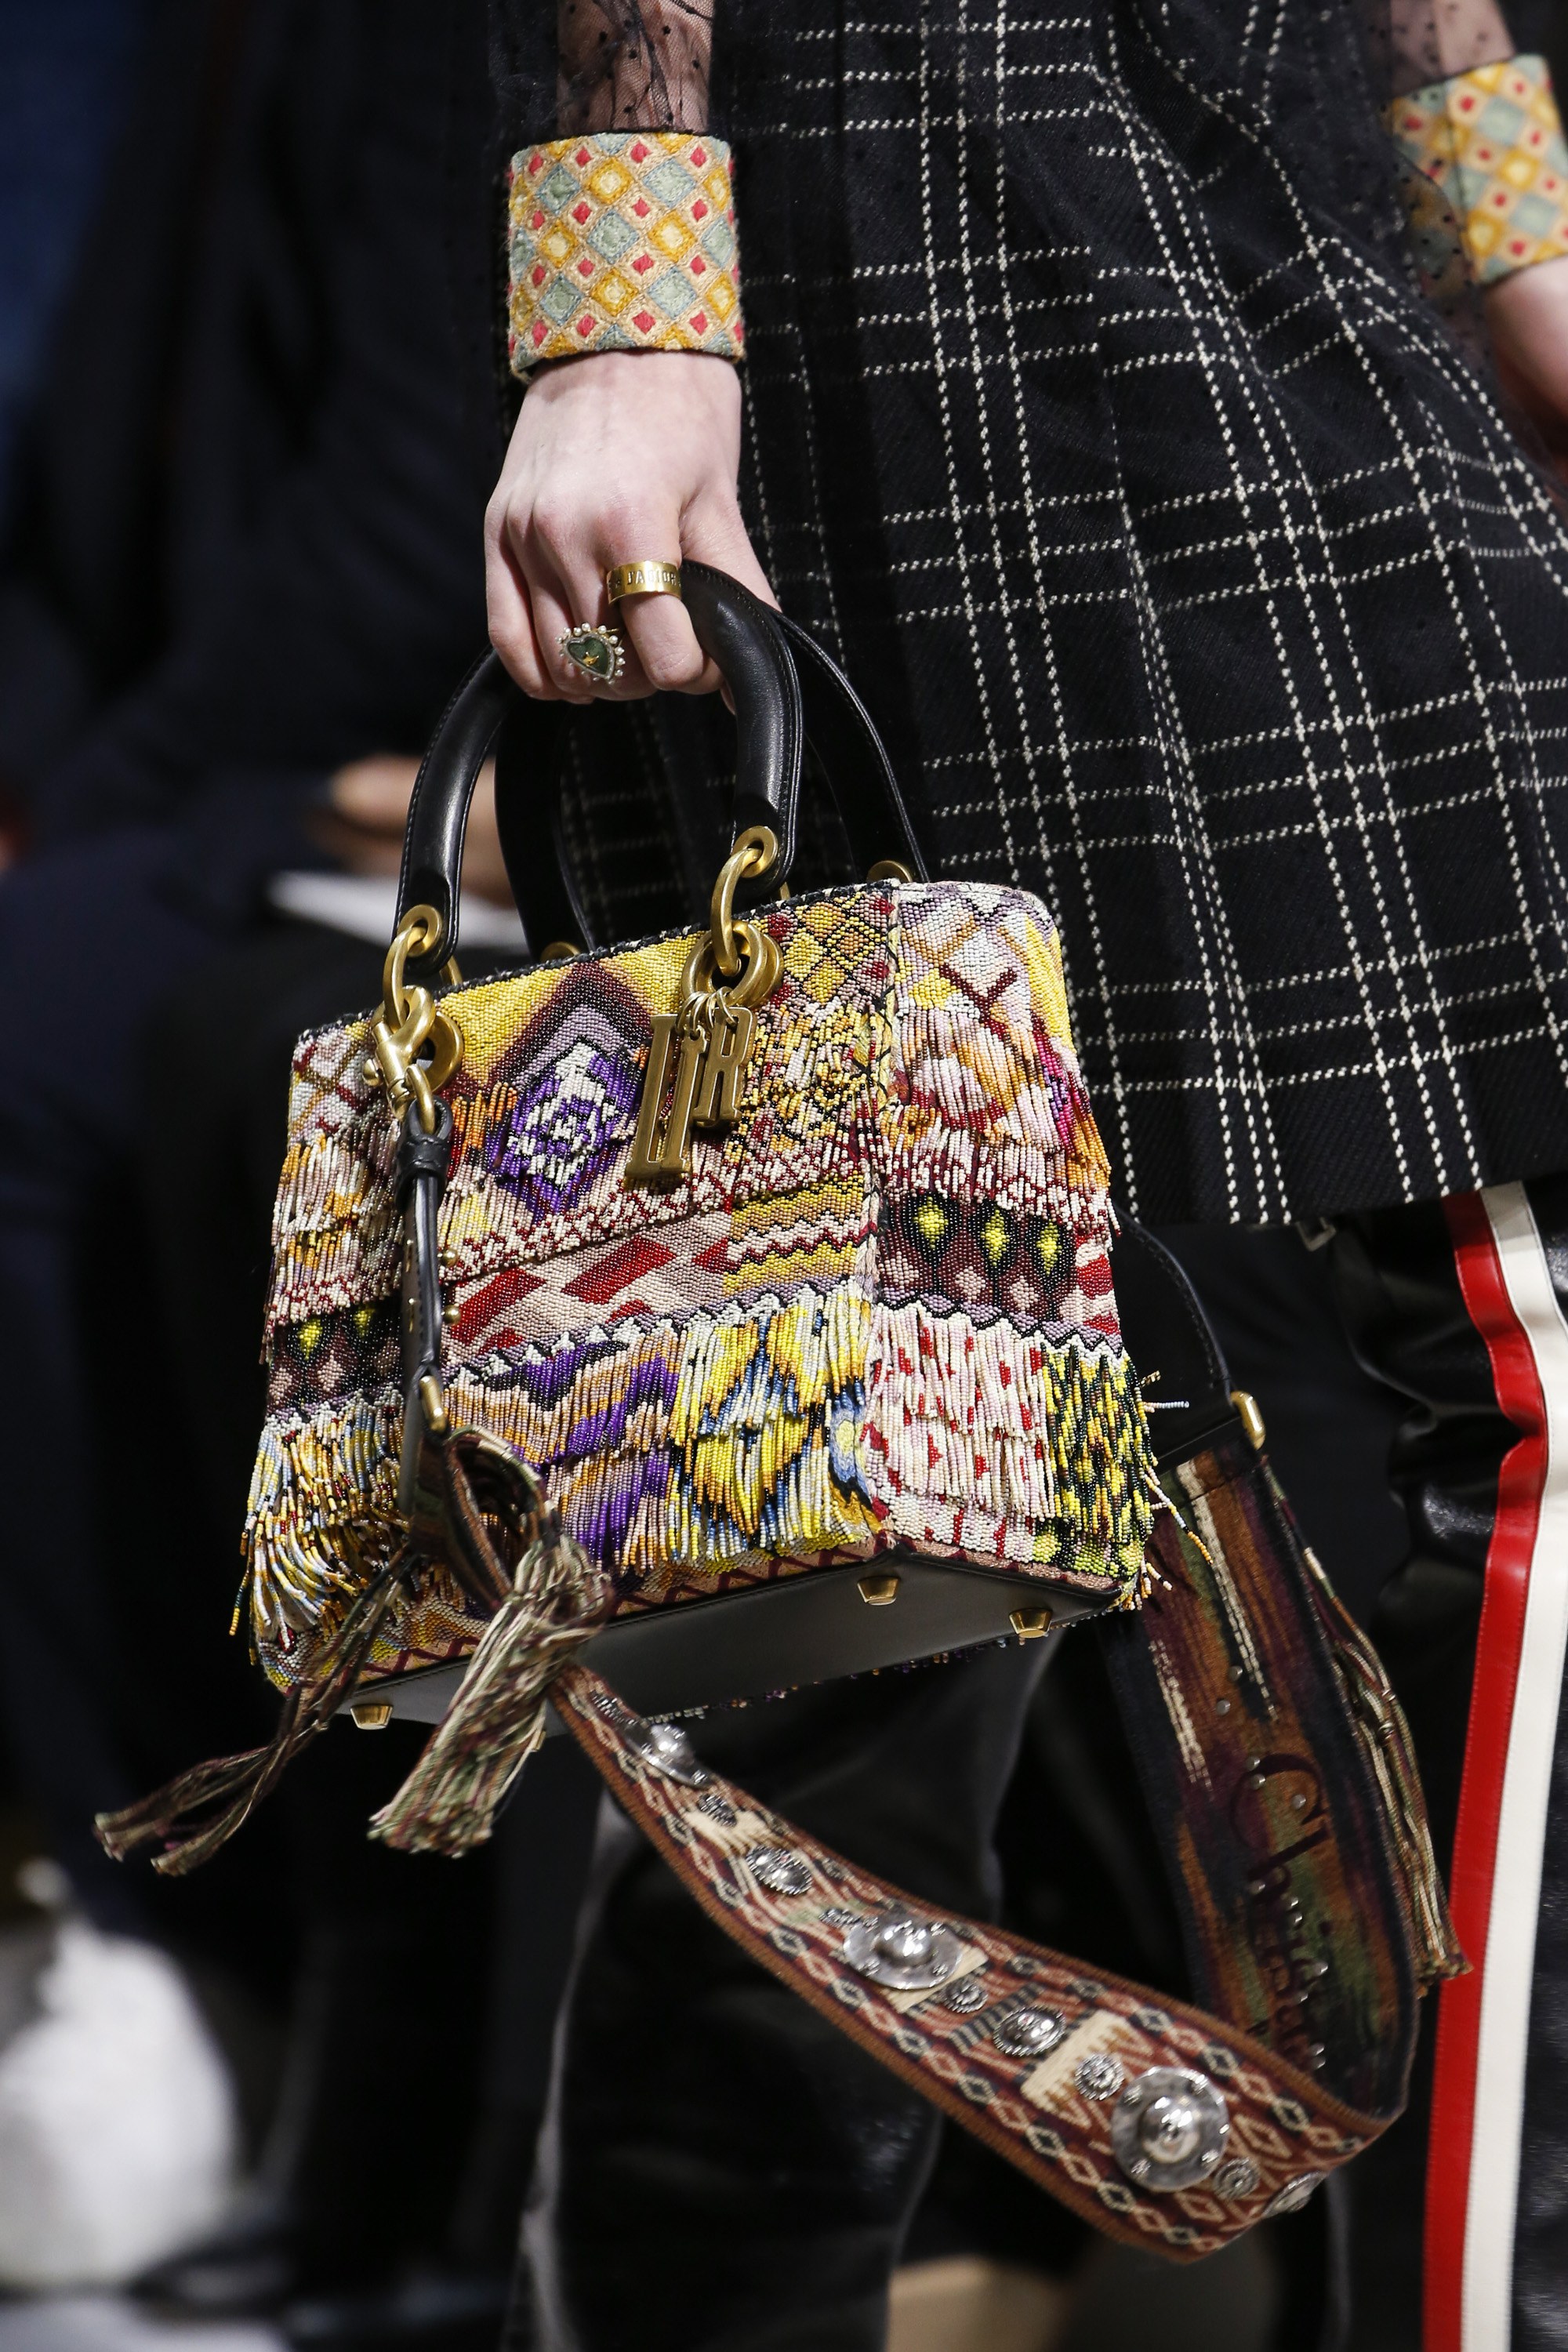 Dior Fall/Winter 2018 Runway Bag Collection featuring Saddle Bags | Spotted Fashion